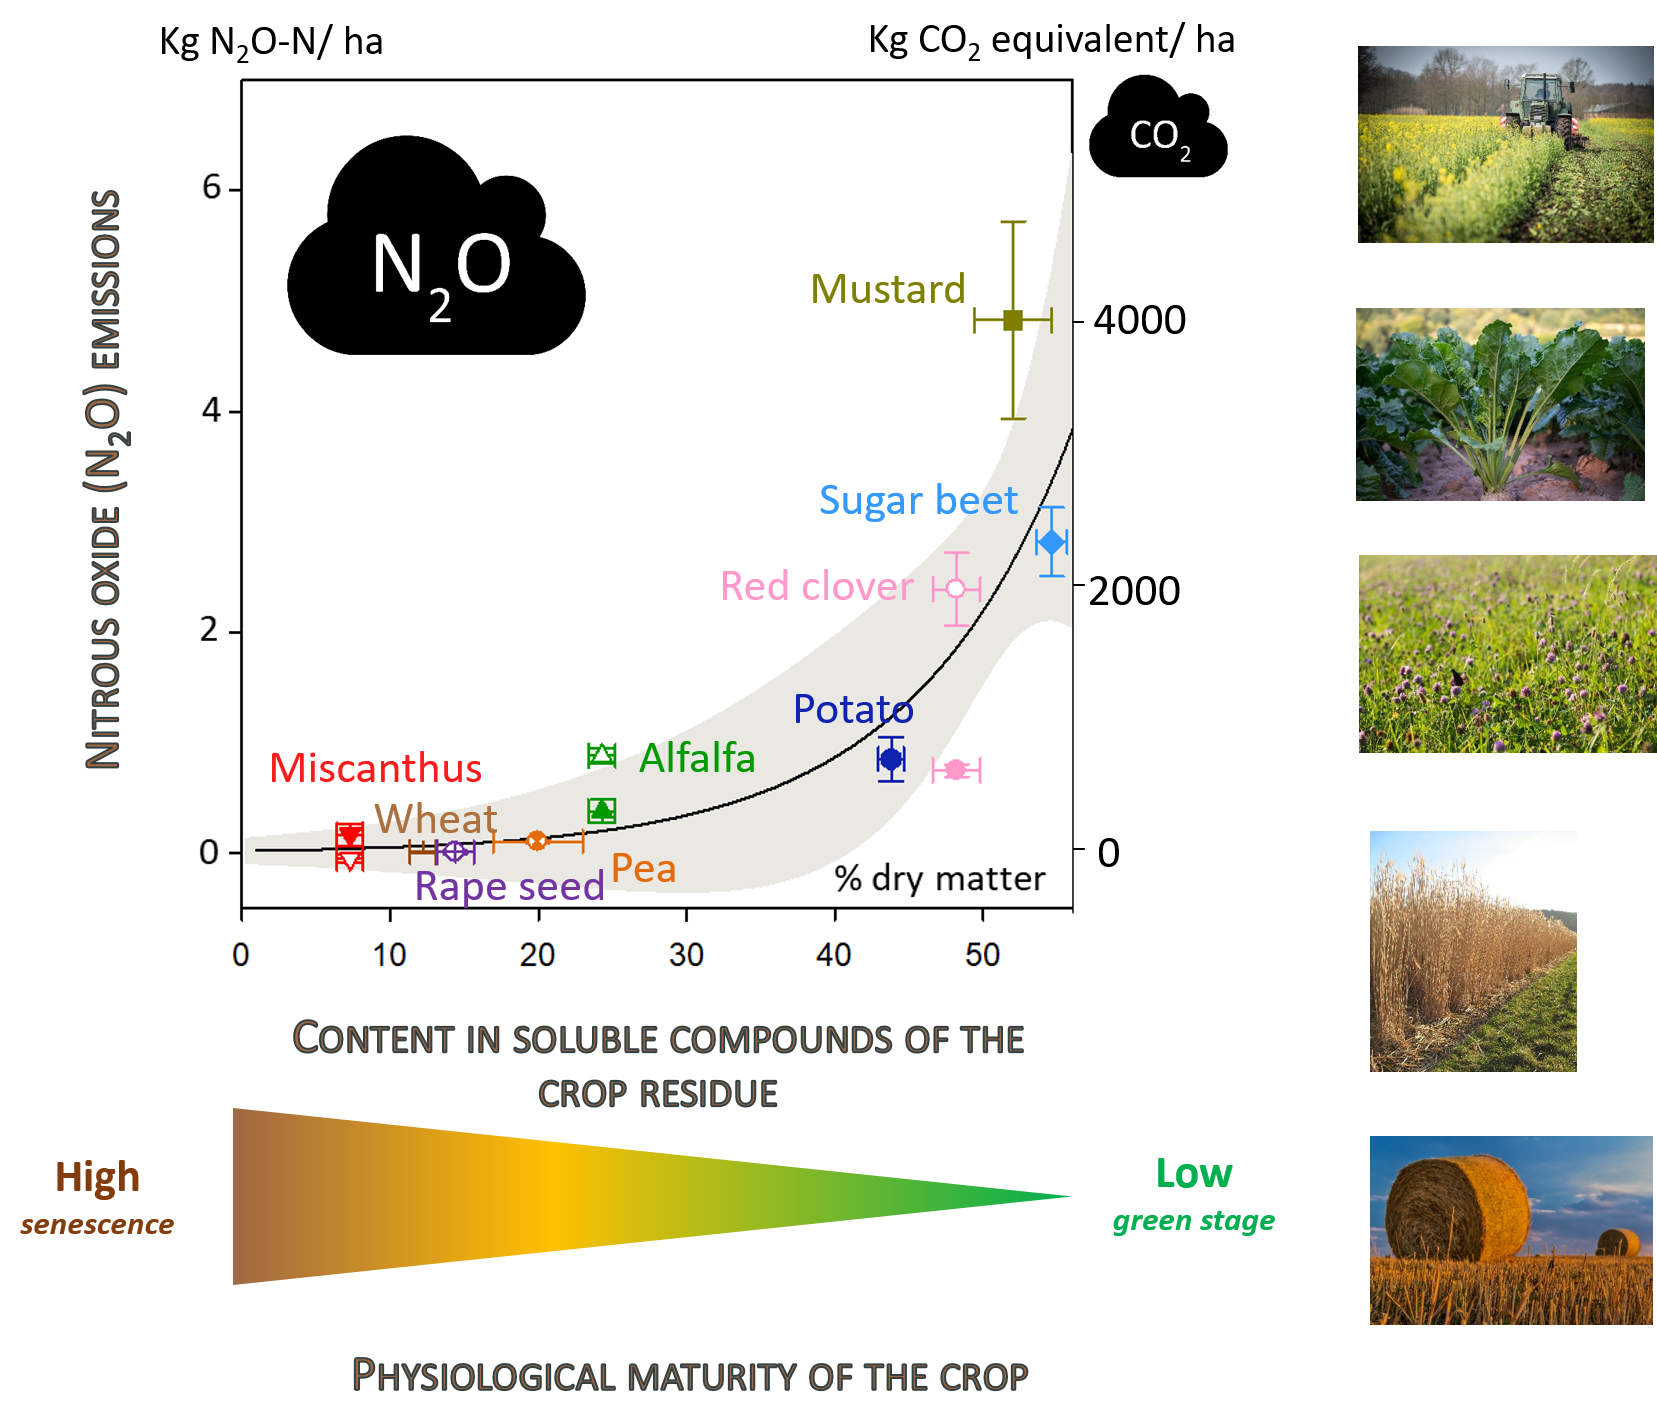 January 10 2022 - The physiological maturity of the plants from which the crop residues originate impacts N2O emissions during their soil decomposition